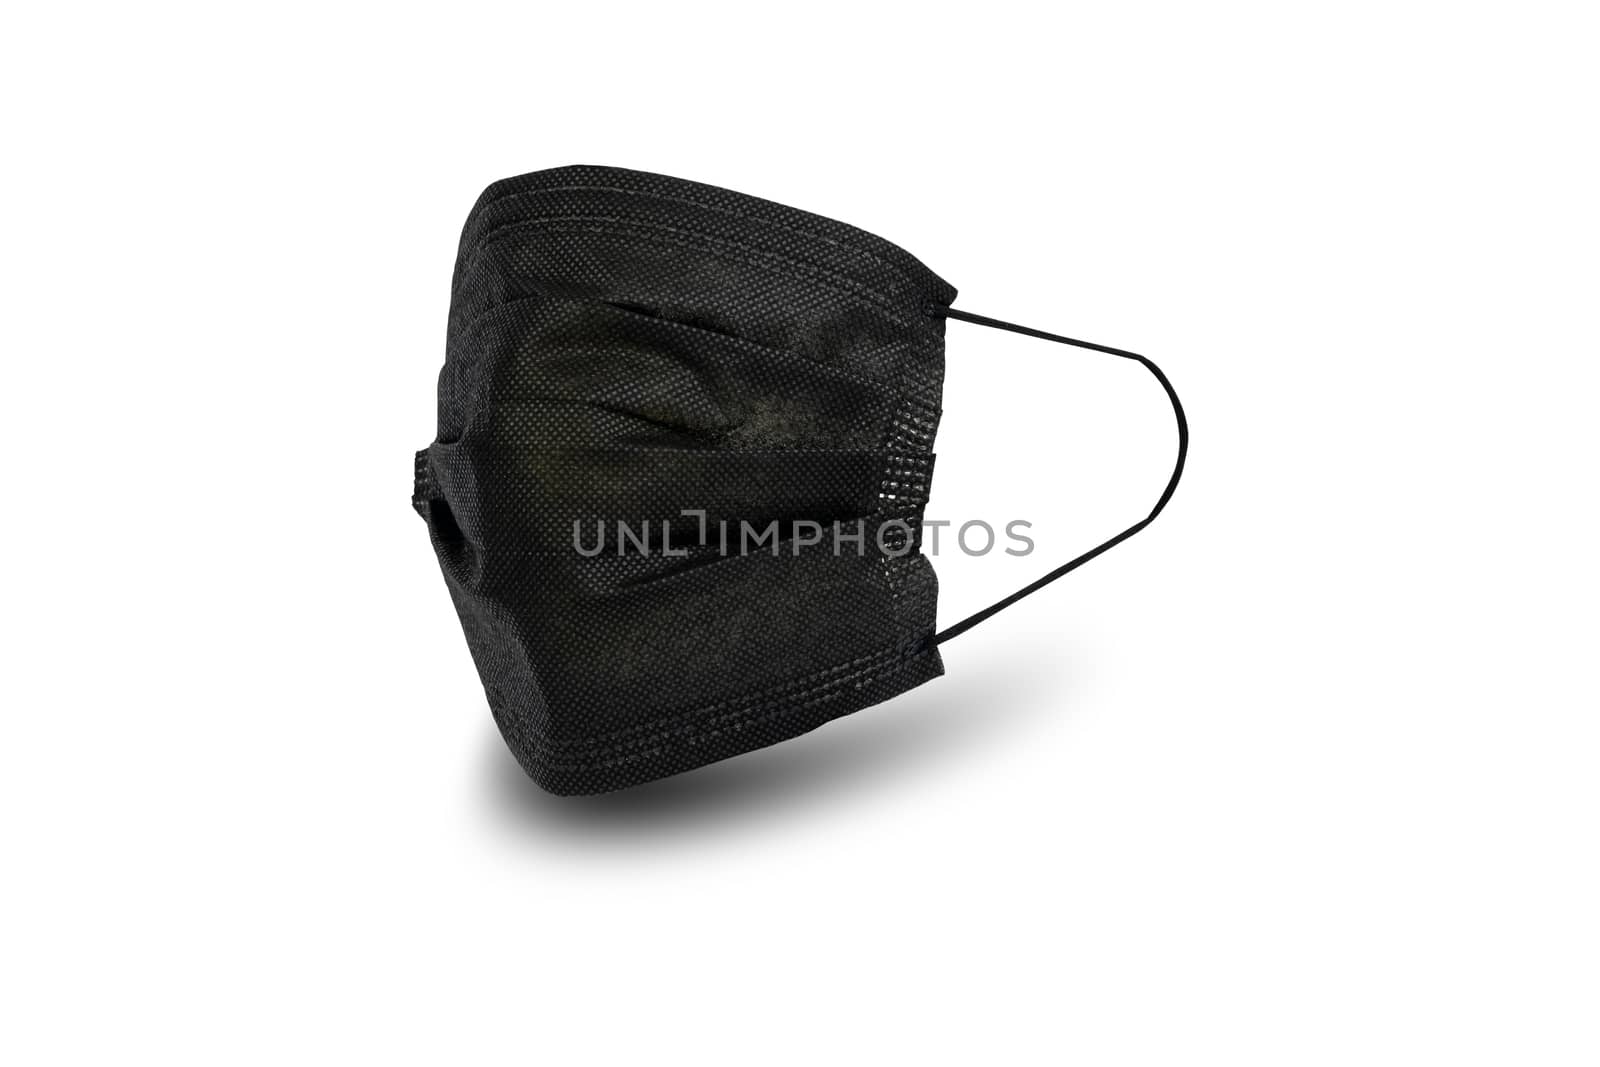 Black sanitary napkin mask for preventing spreading and respiratory infections isolated on white background, Social distancing and stop Coronavirus Covid-19 concept.